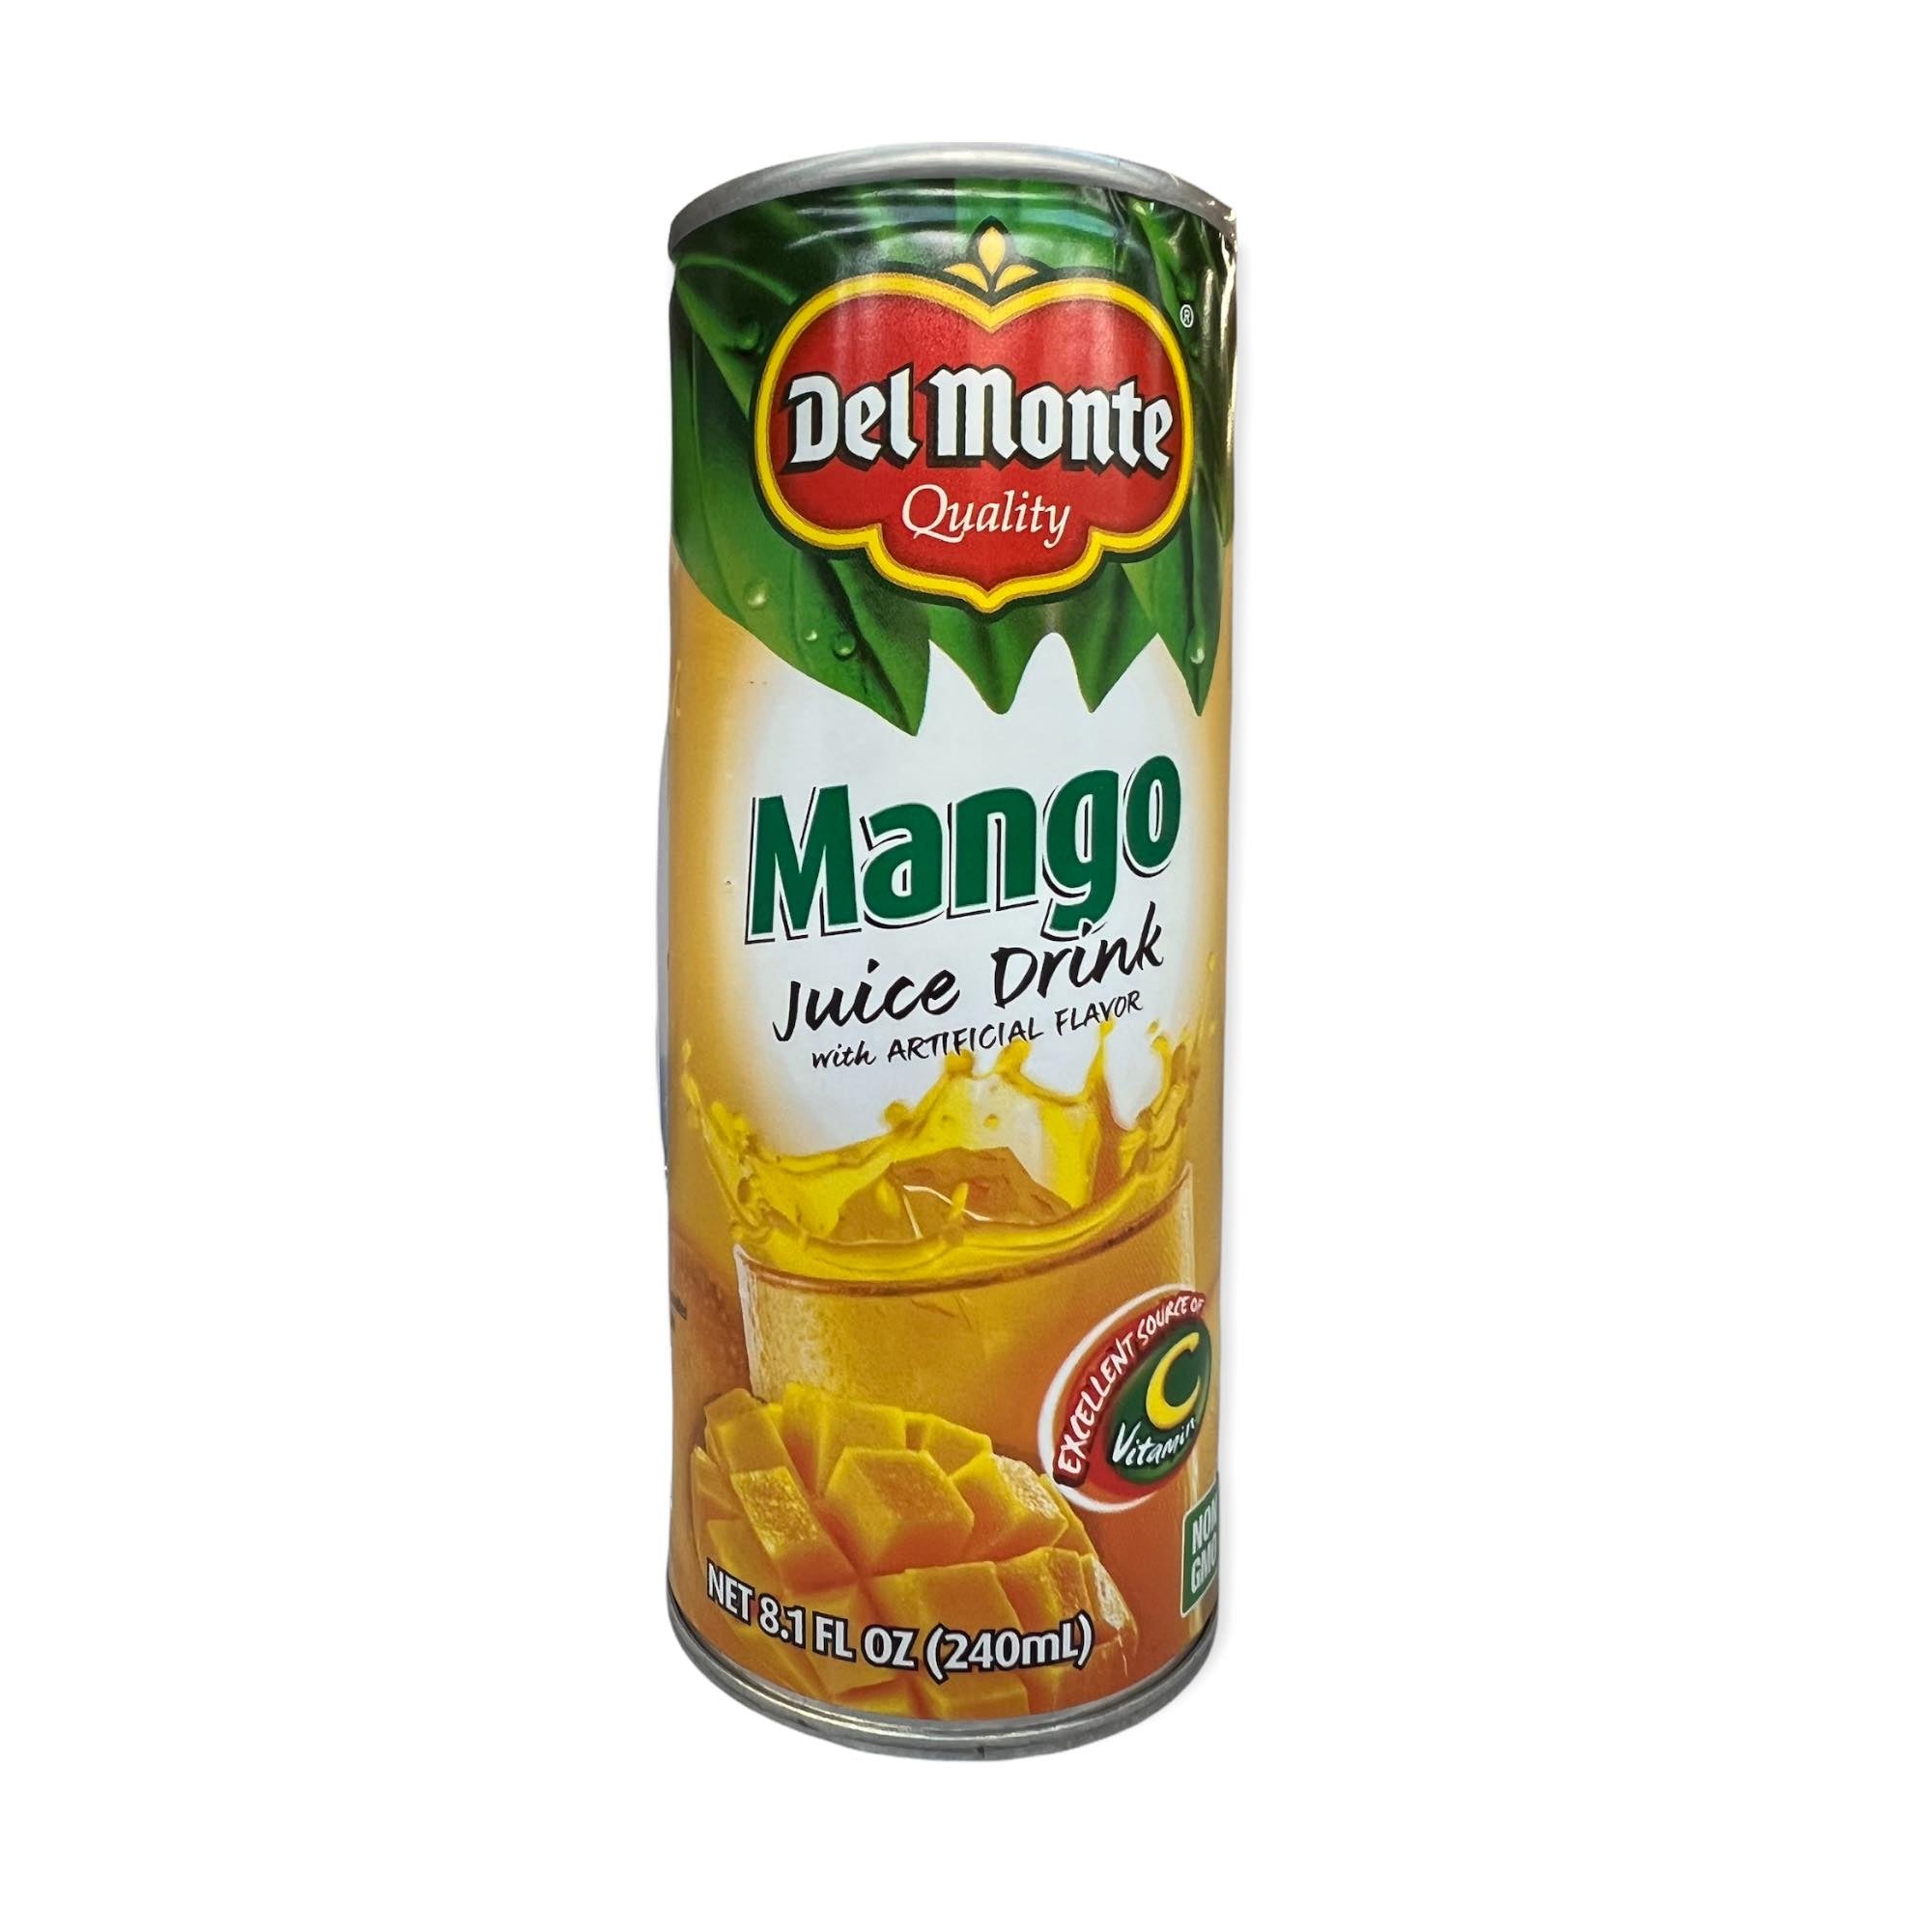 Del Monte Quality - Mango Juice Drink with Artificial Flavor In Can - 240ml